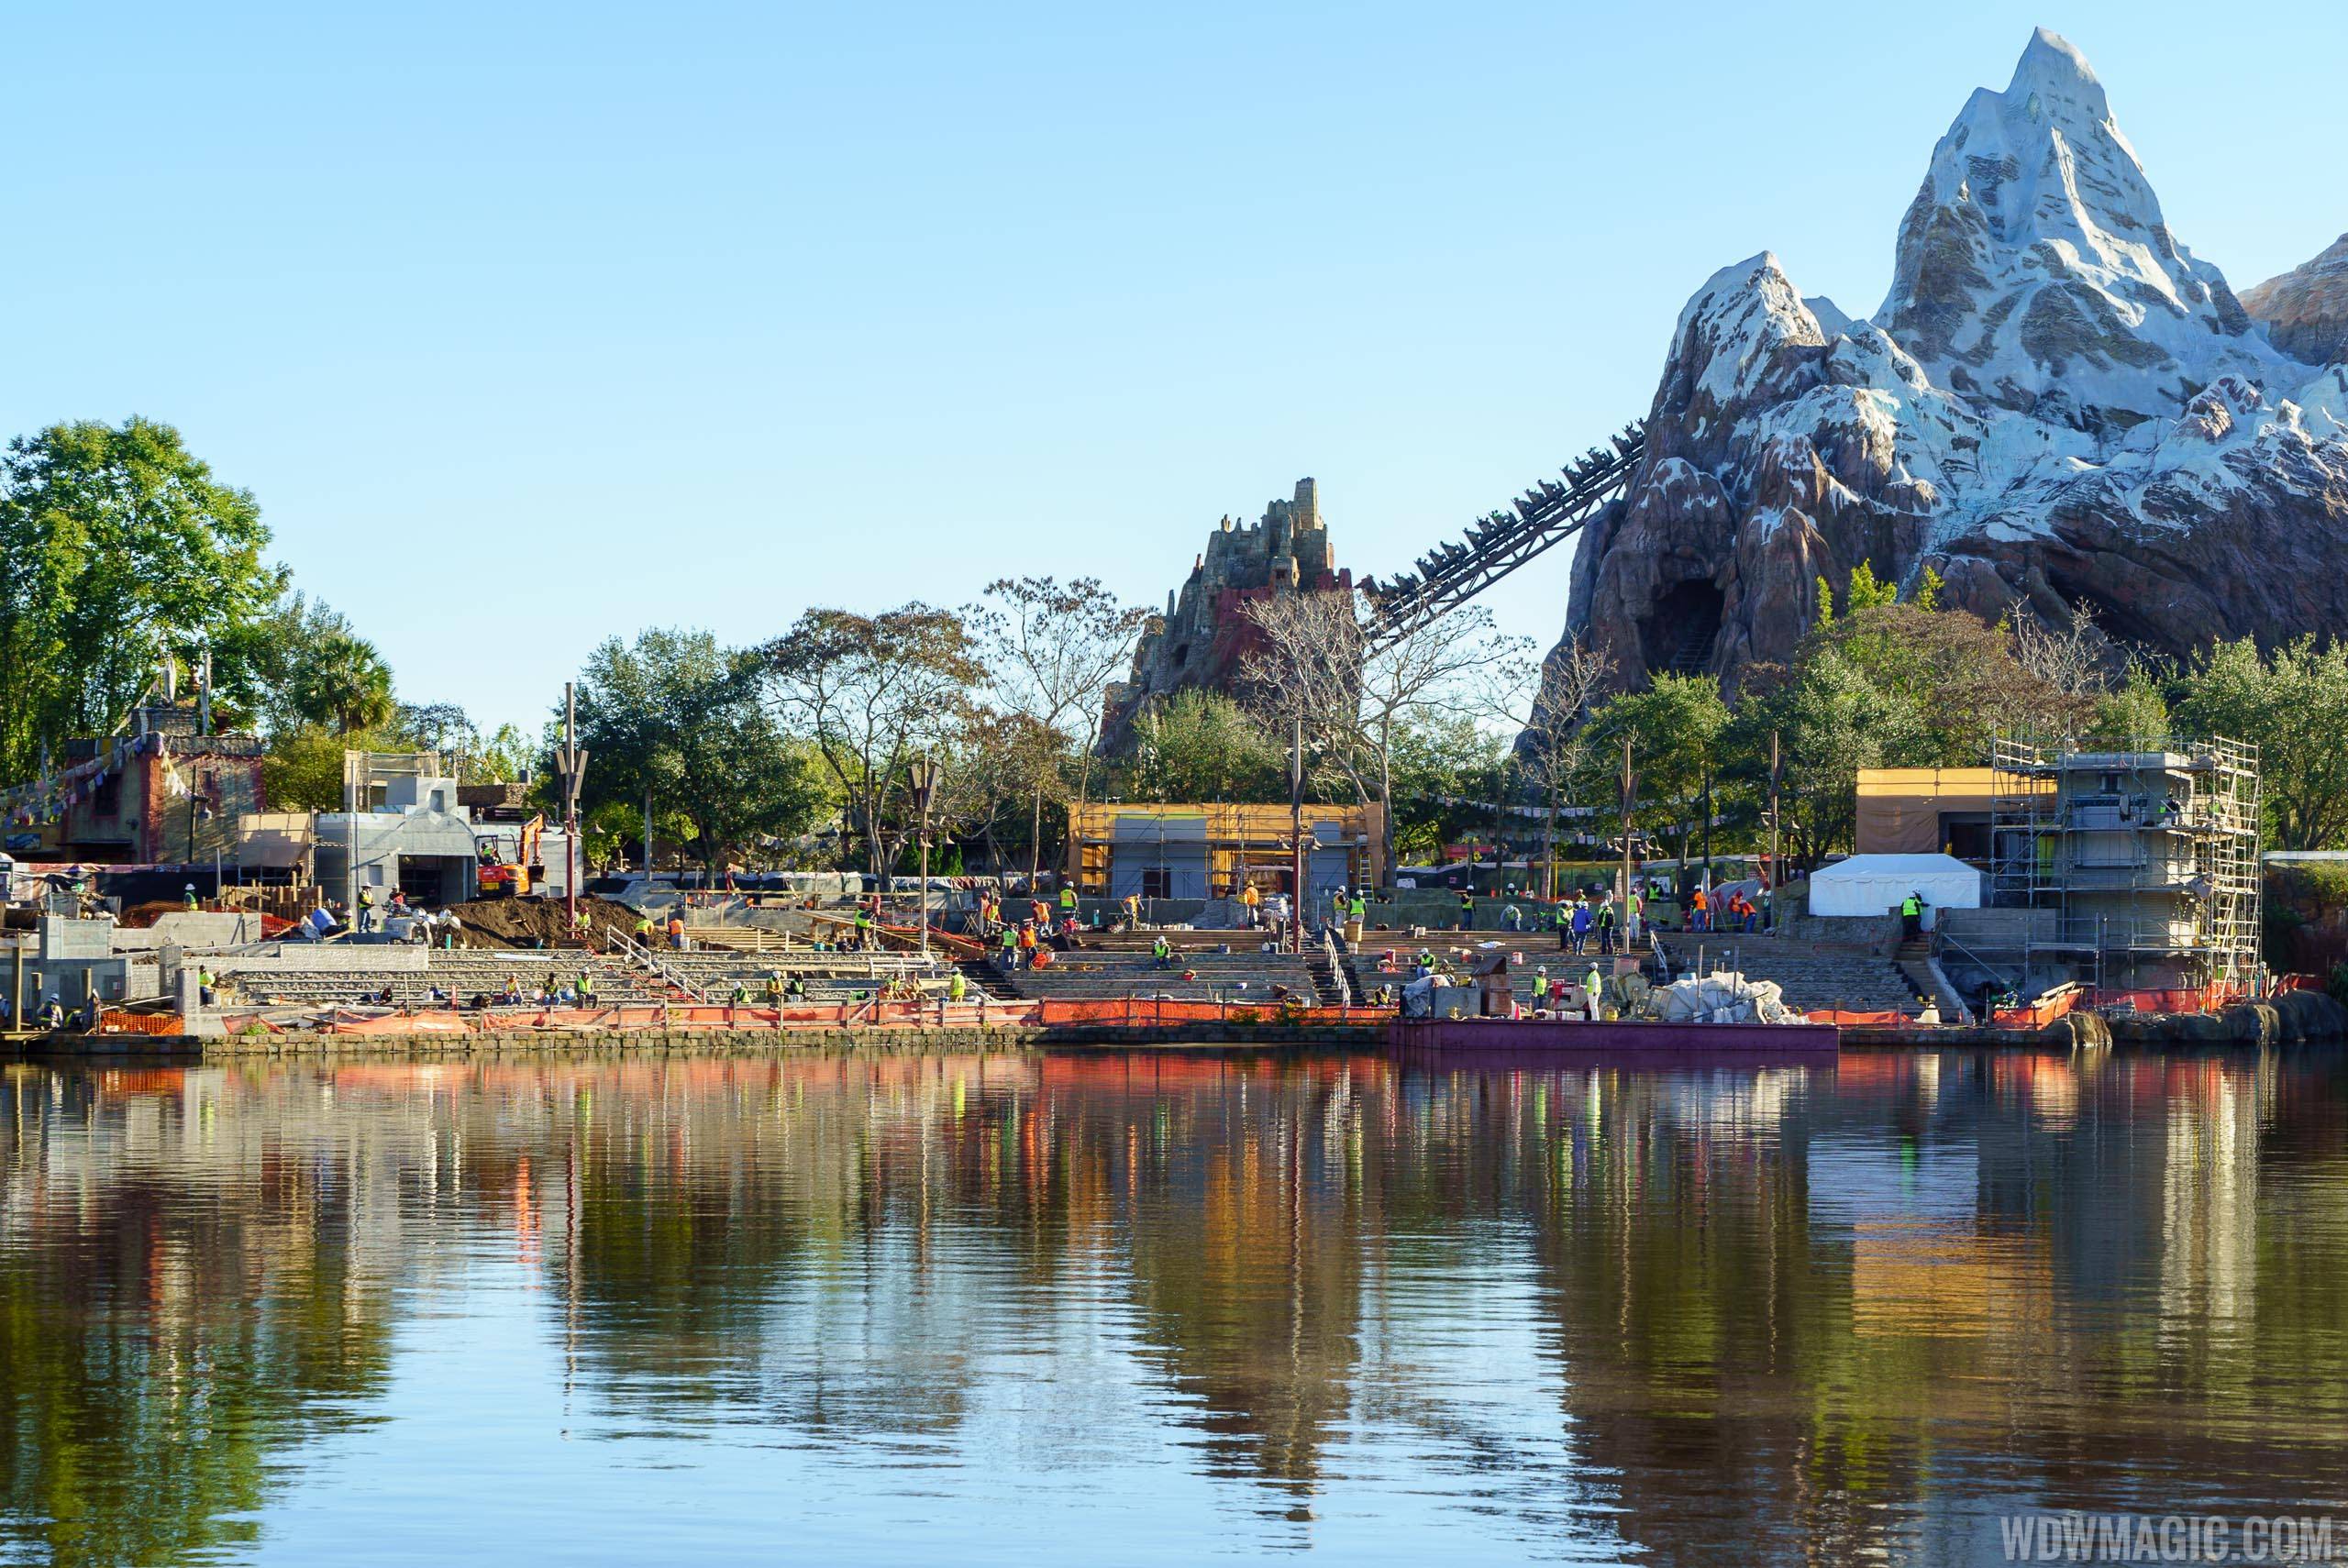 Expedition Everest area seating